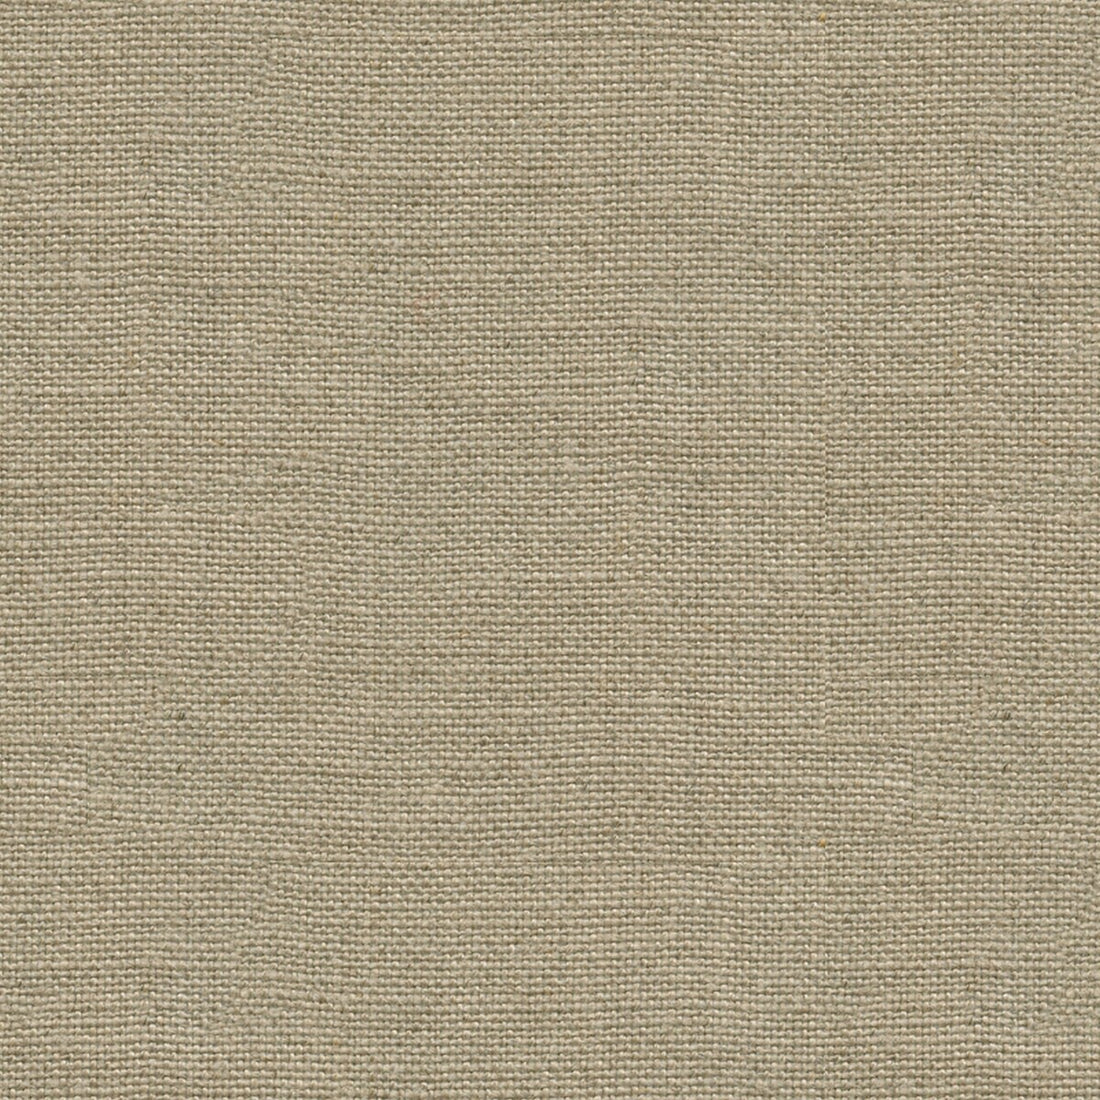 Weekend Linen fabric in linen color - pattern FD698.K104.0 - by Mulberry in the Crayford collection